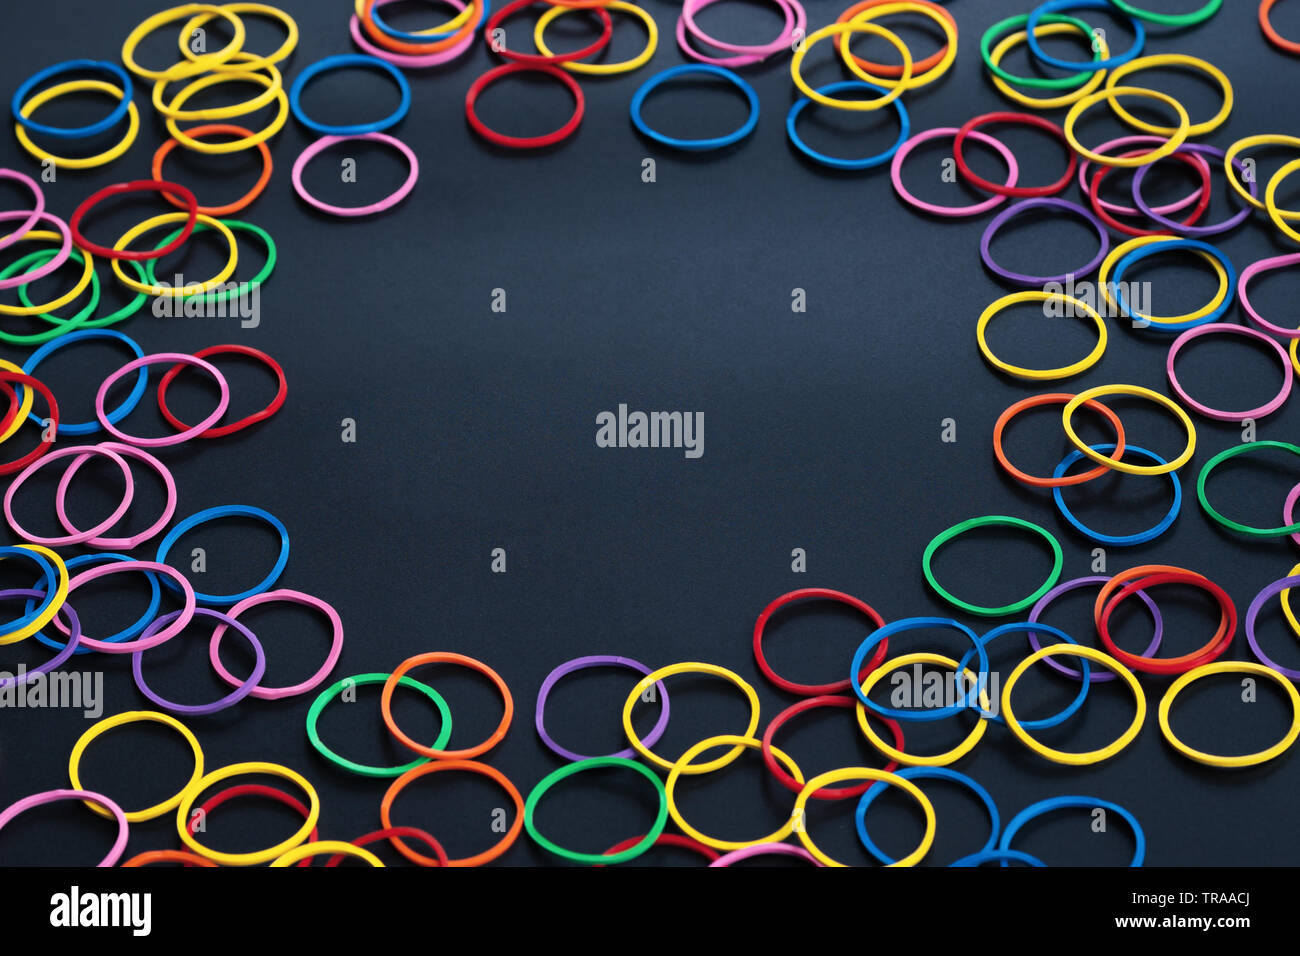 Information sharing concept, colorful rubber band on black background with copy space Stock Photo